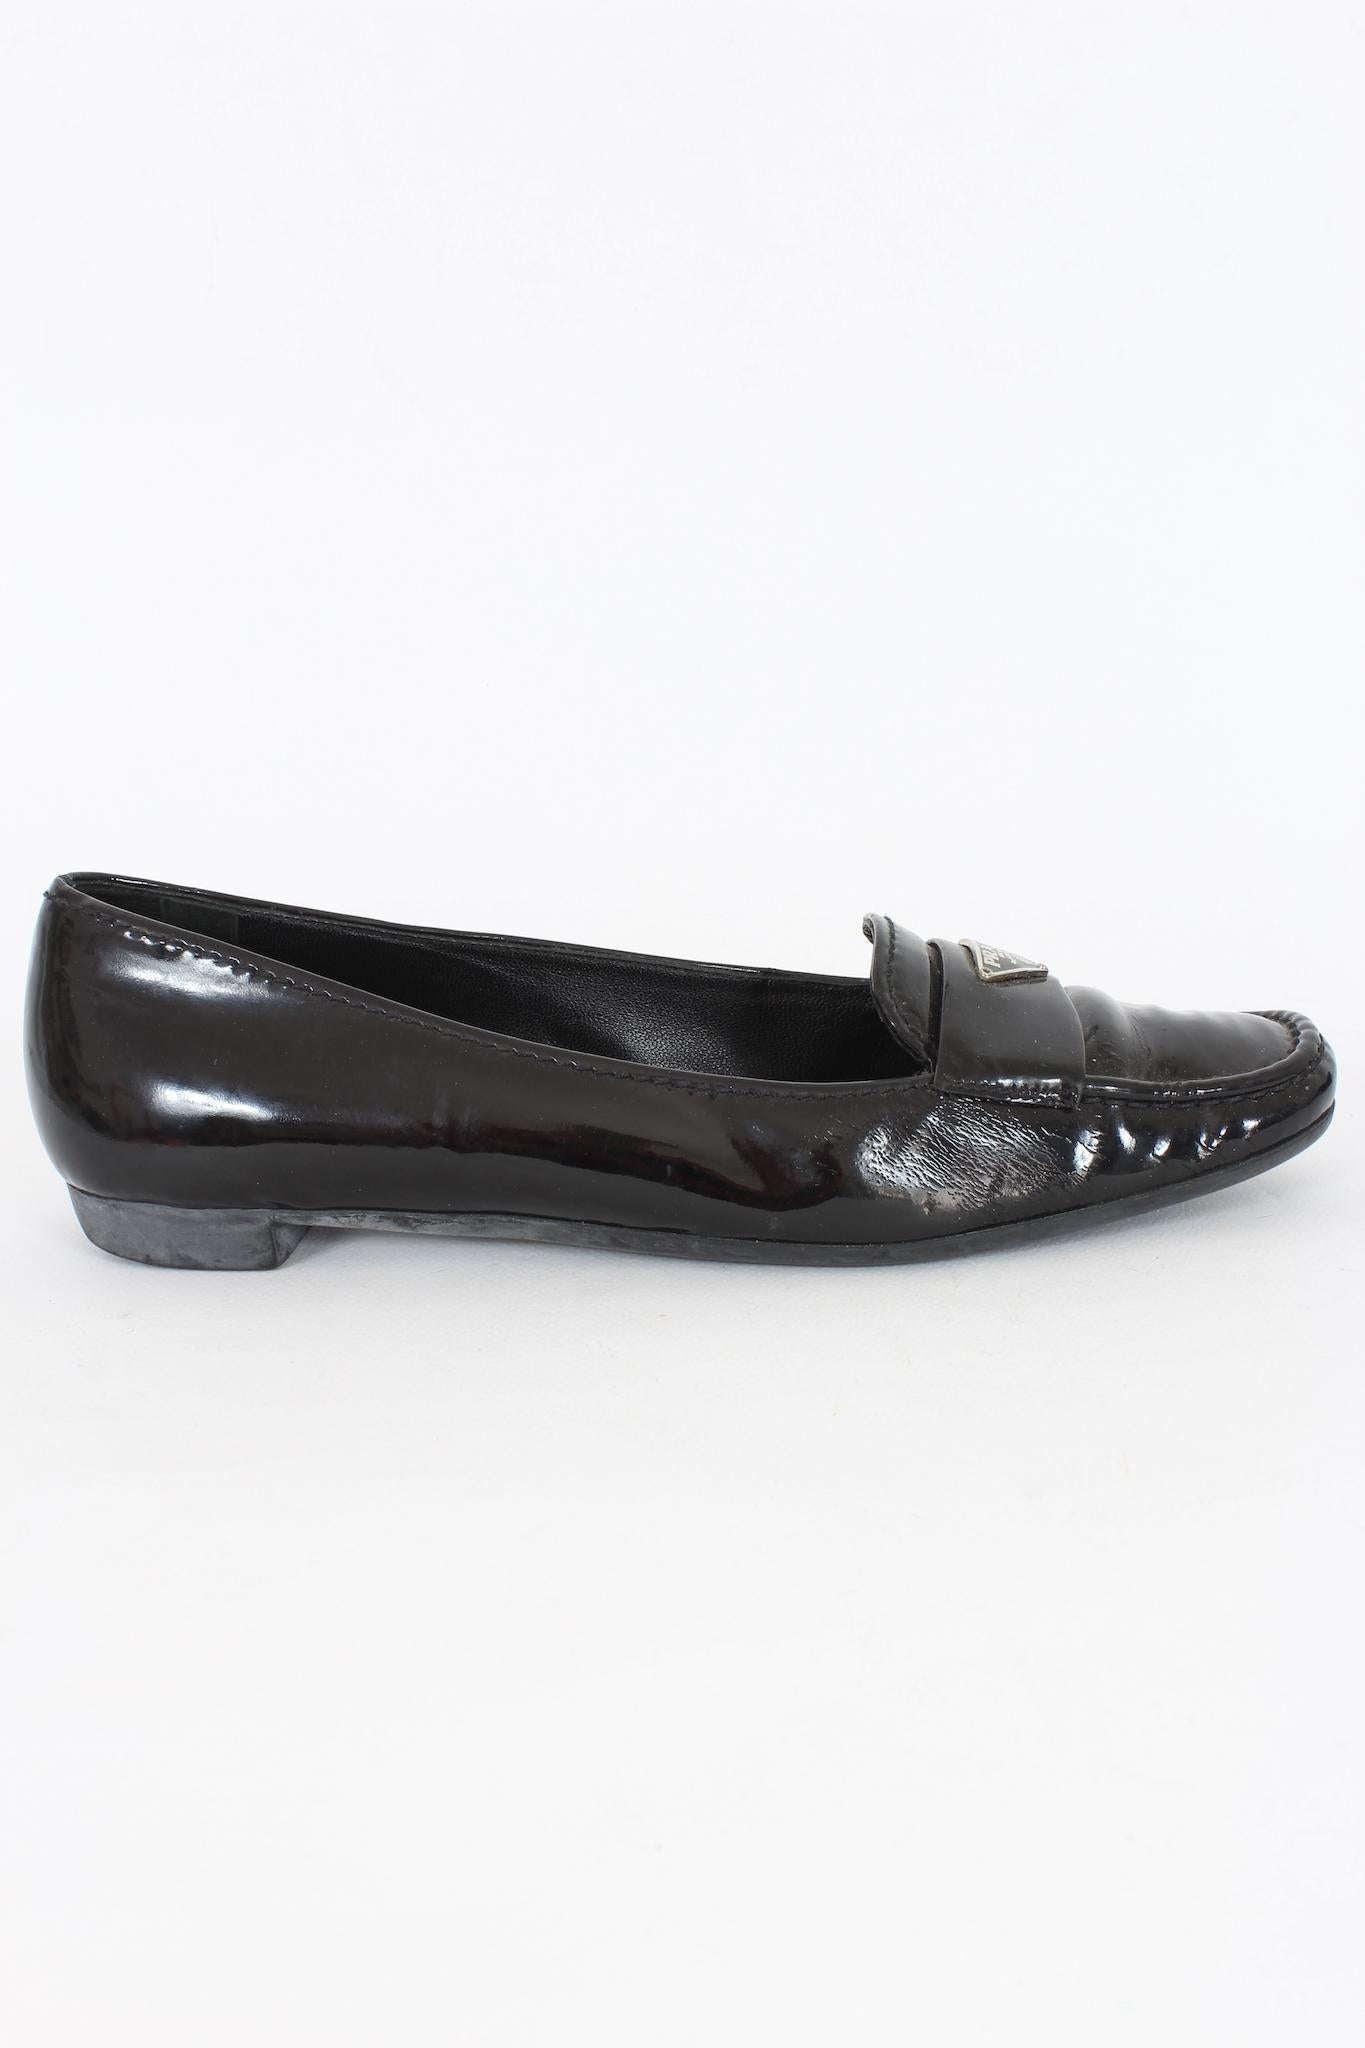 Prada Black Patent Leather Vintage Moccasins Shoes 90s In Good Condition In Brindisi, Bt